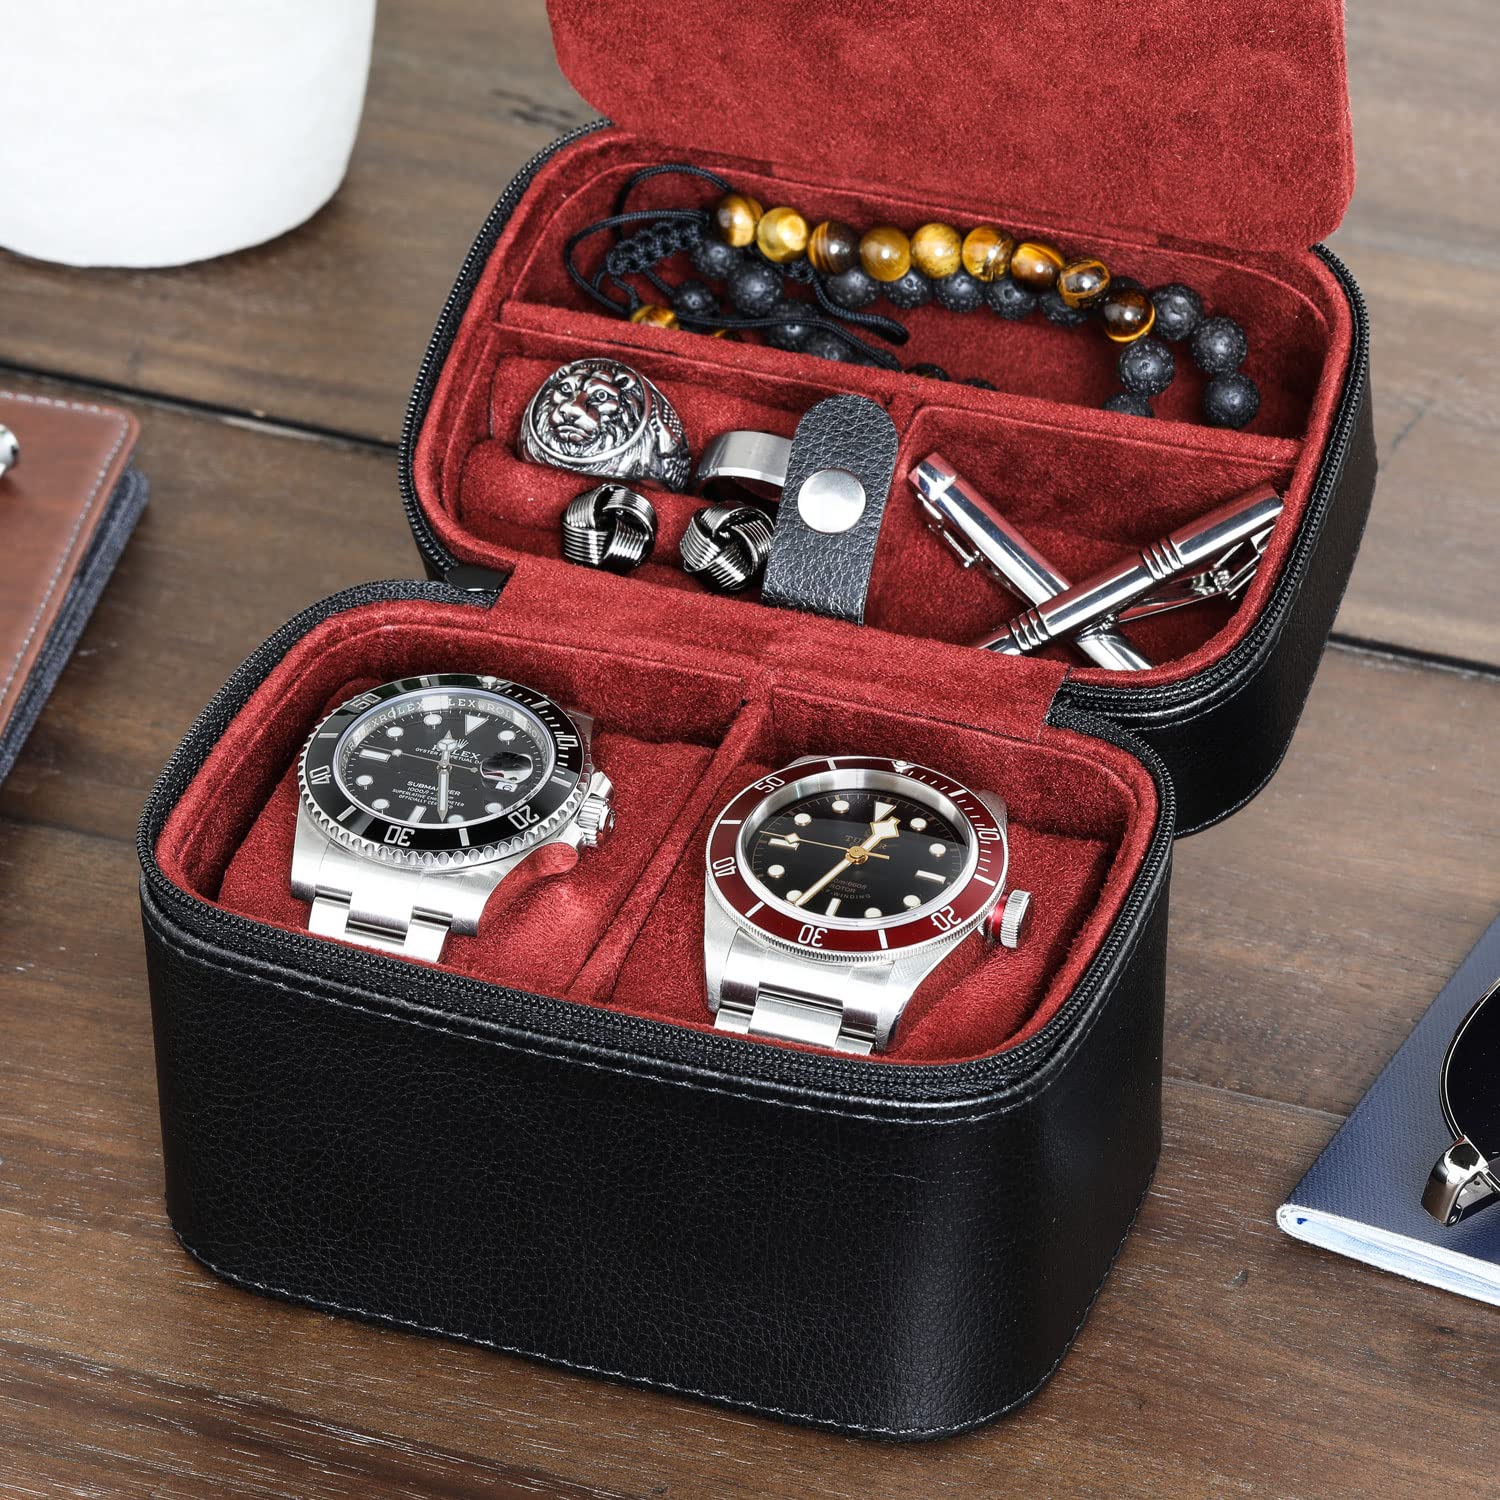 ROTHWELL 2 Watch Travel Case Storage Organizer for 2 Watches | Tough Portable Protection w/Zipper Fits All Wristwatches & Smart Watches Up to 50mm (Black/Red)